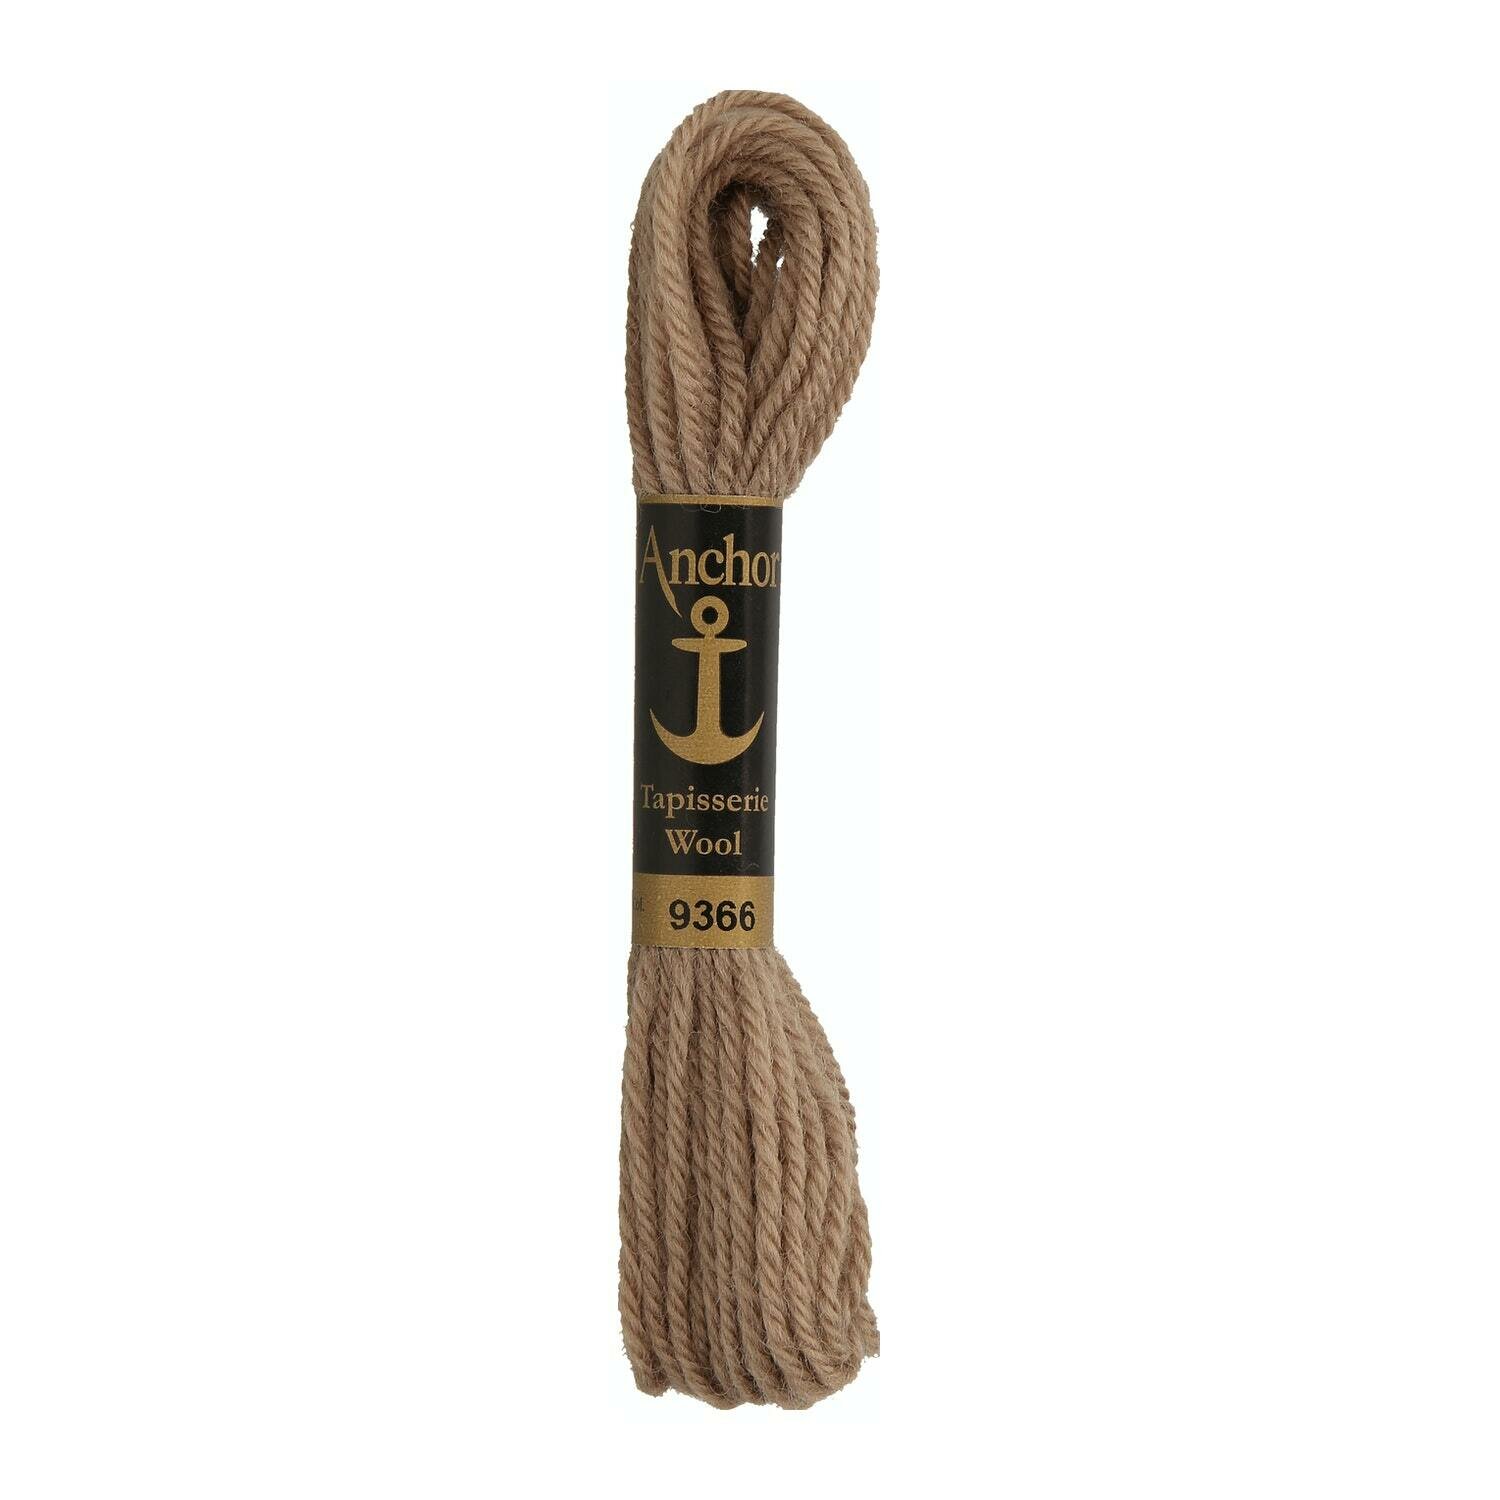 Anchor Tapisserie Wool #  09366